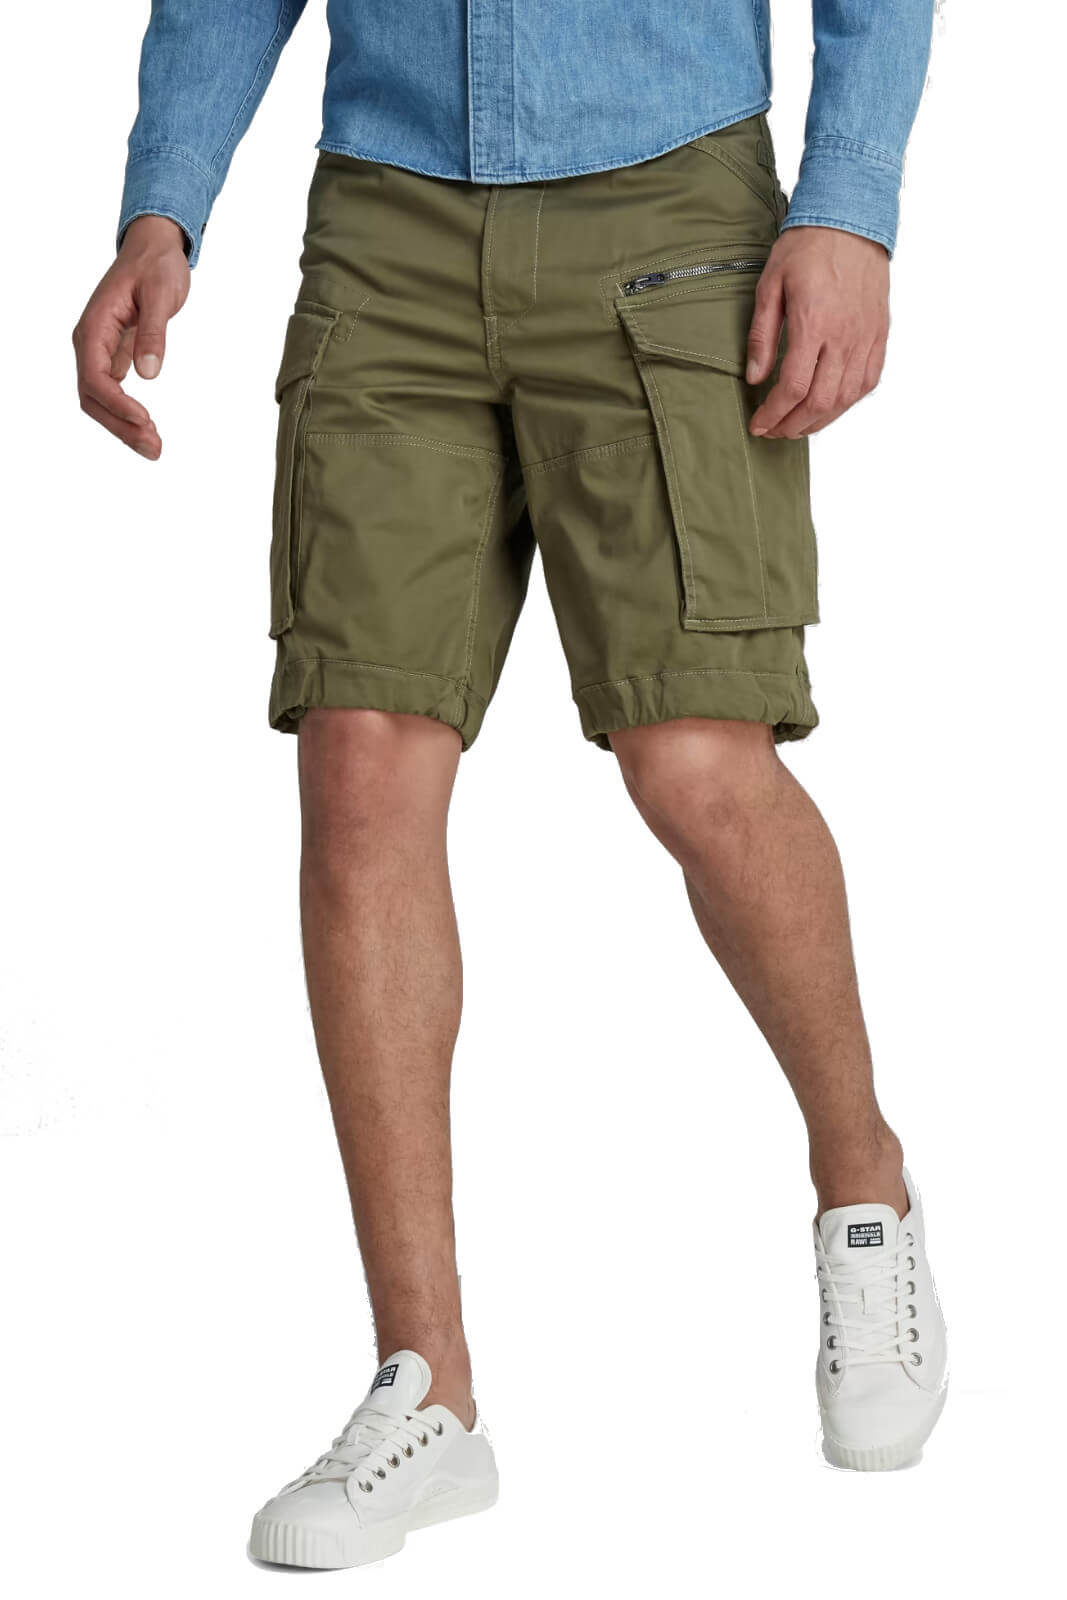 G-Star RAW men's shorts ROVIC RELAXED